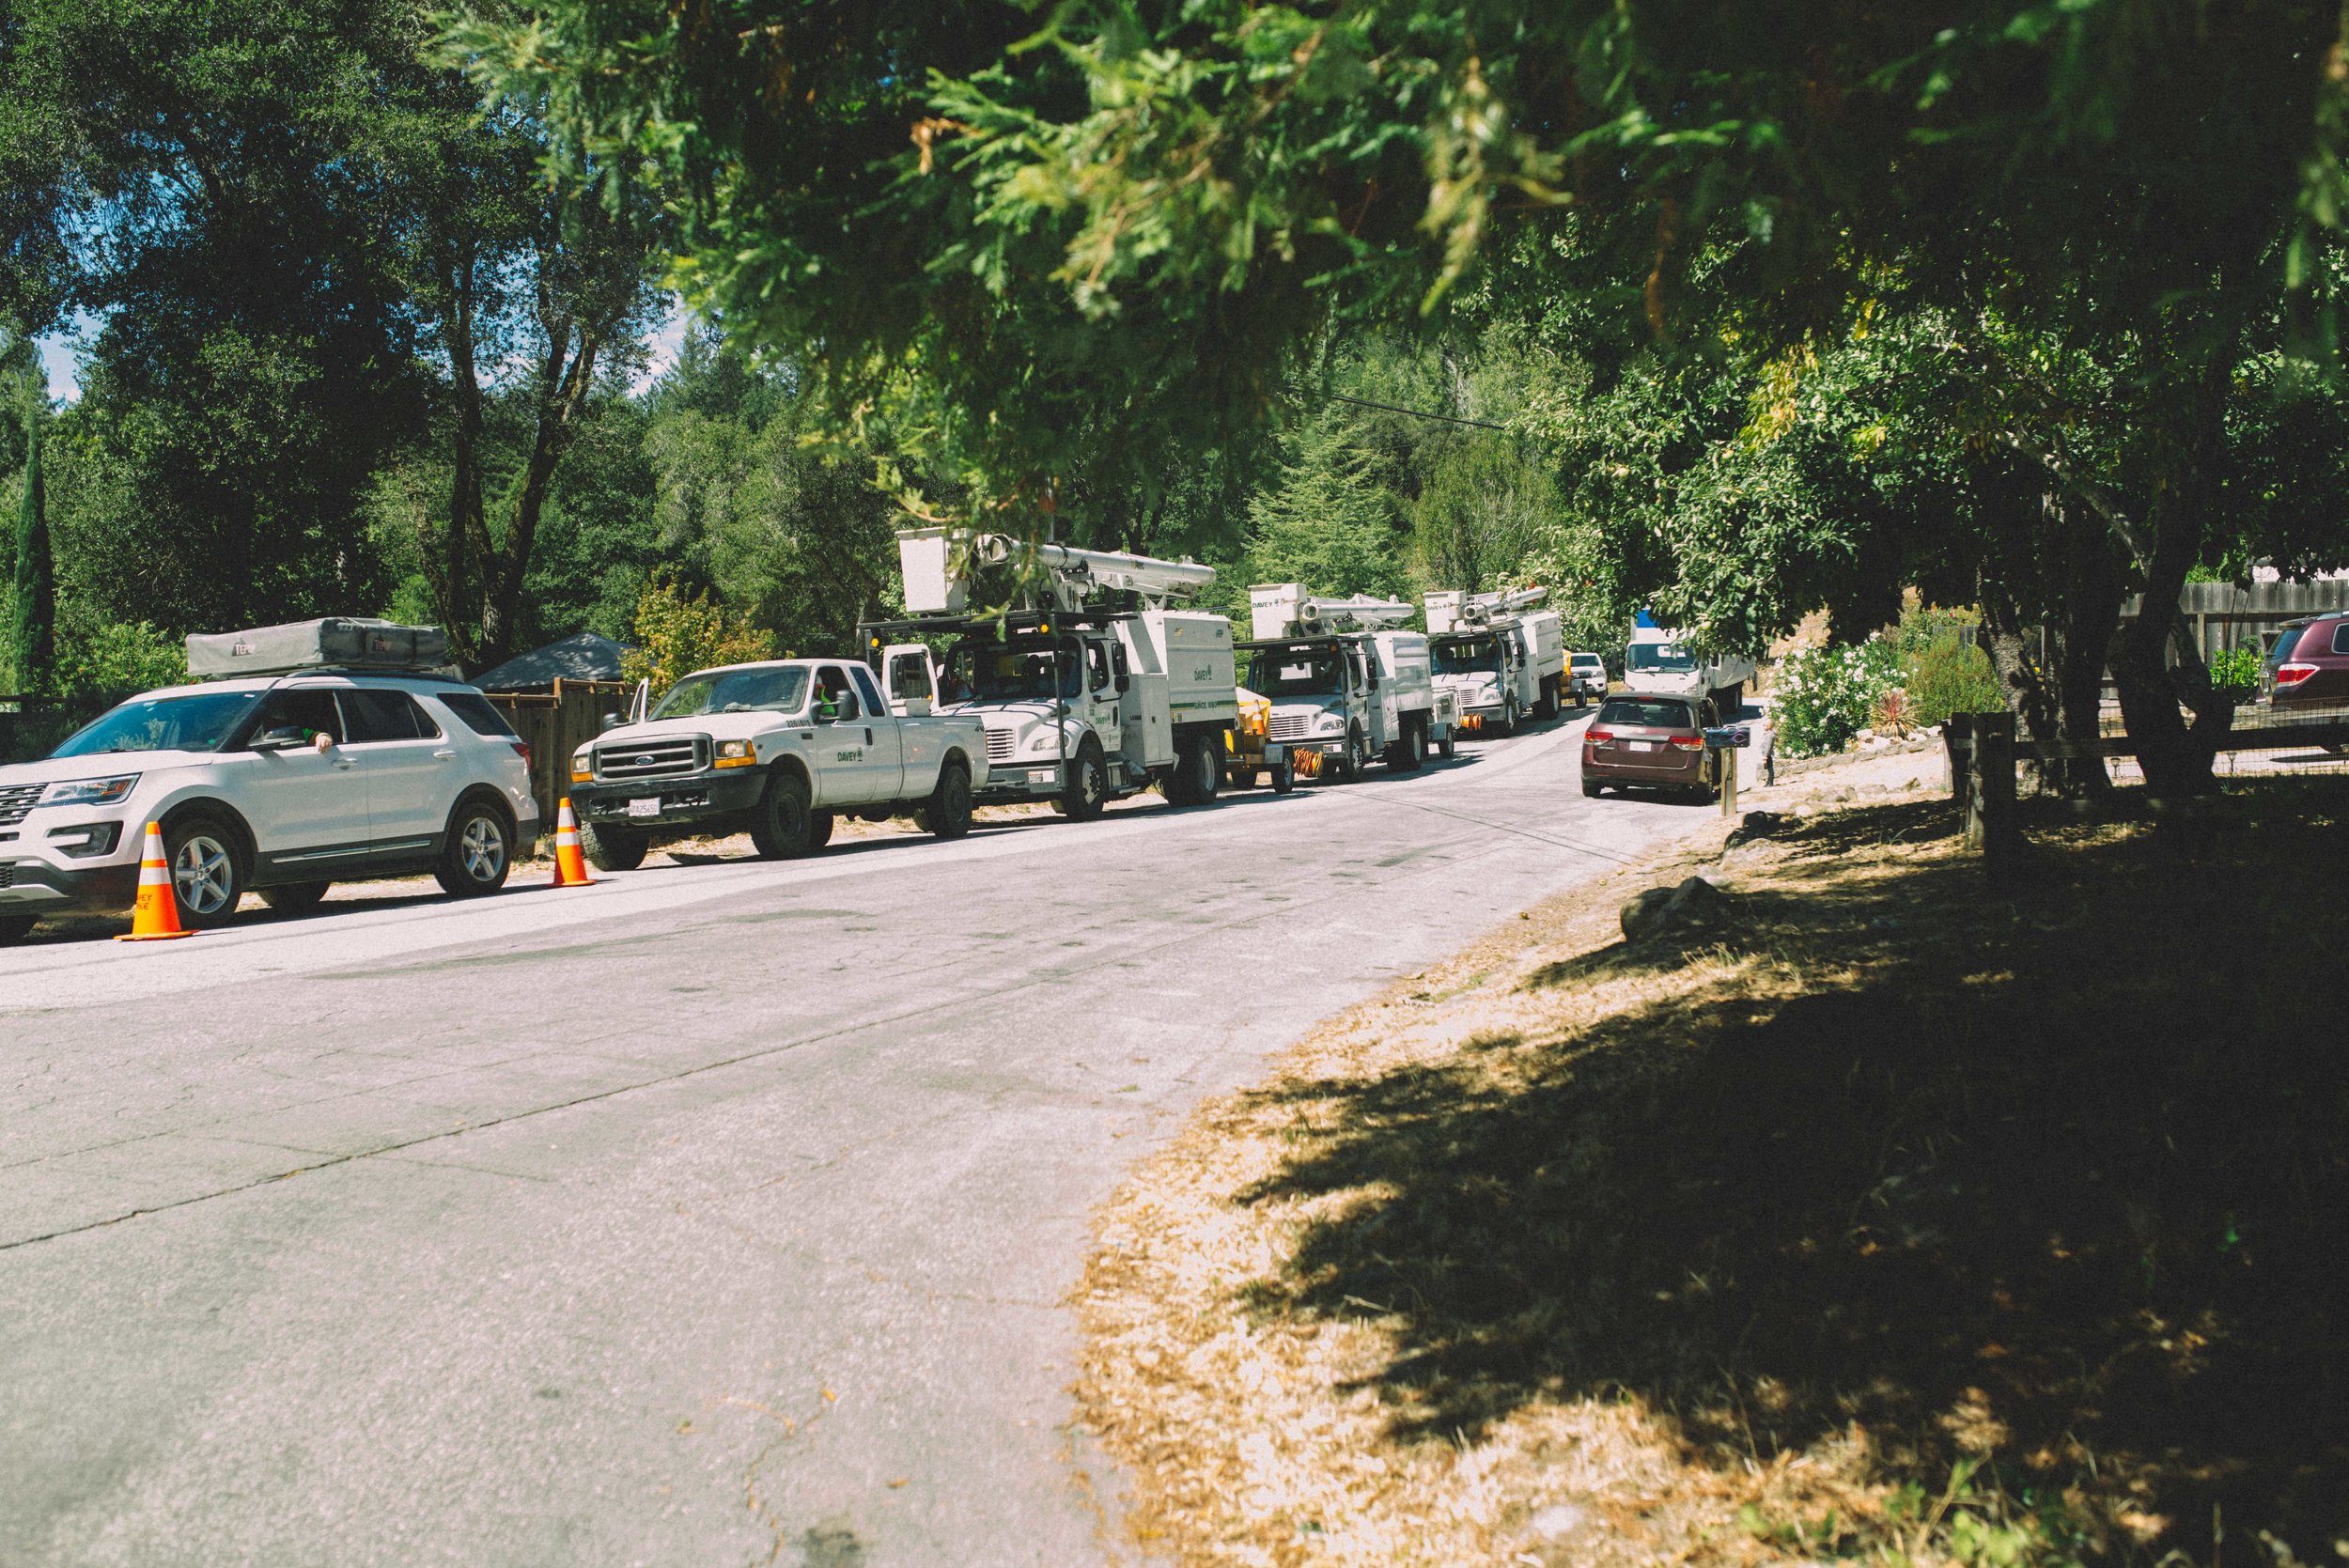  Contract tree workers arrive in a neighborhood to begin Wildfire Safety program work removing trees and vegetation near PG&amp;E high voltage power lines.  